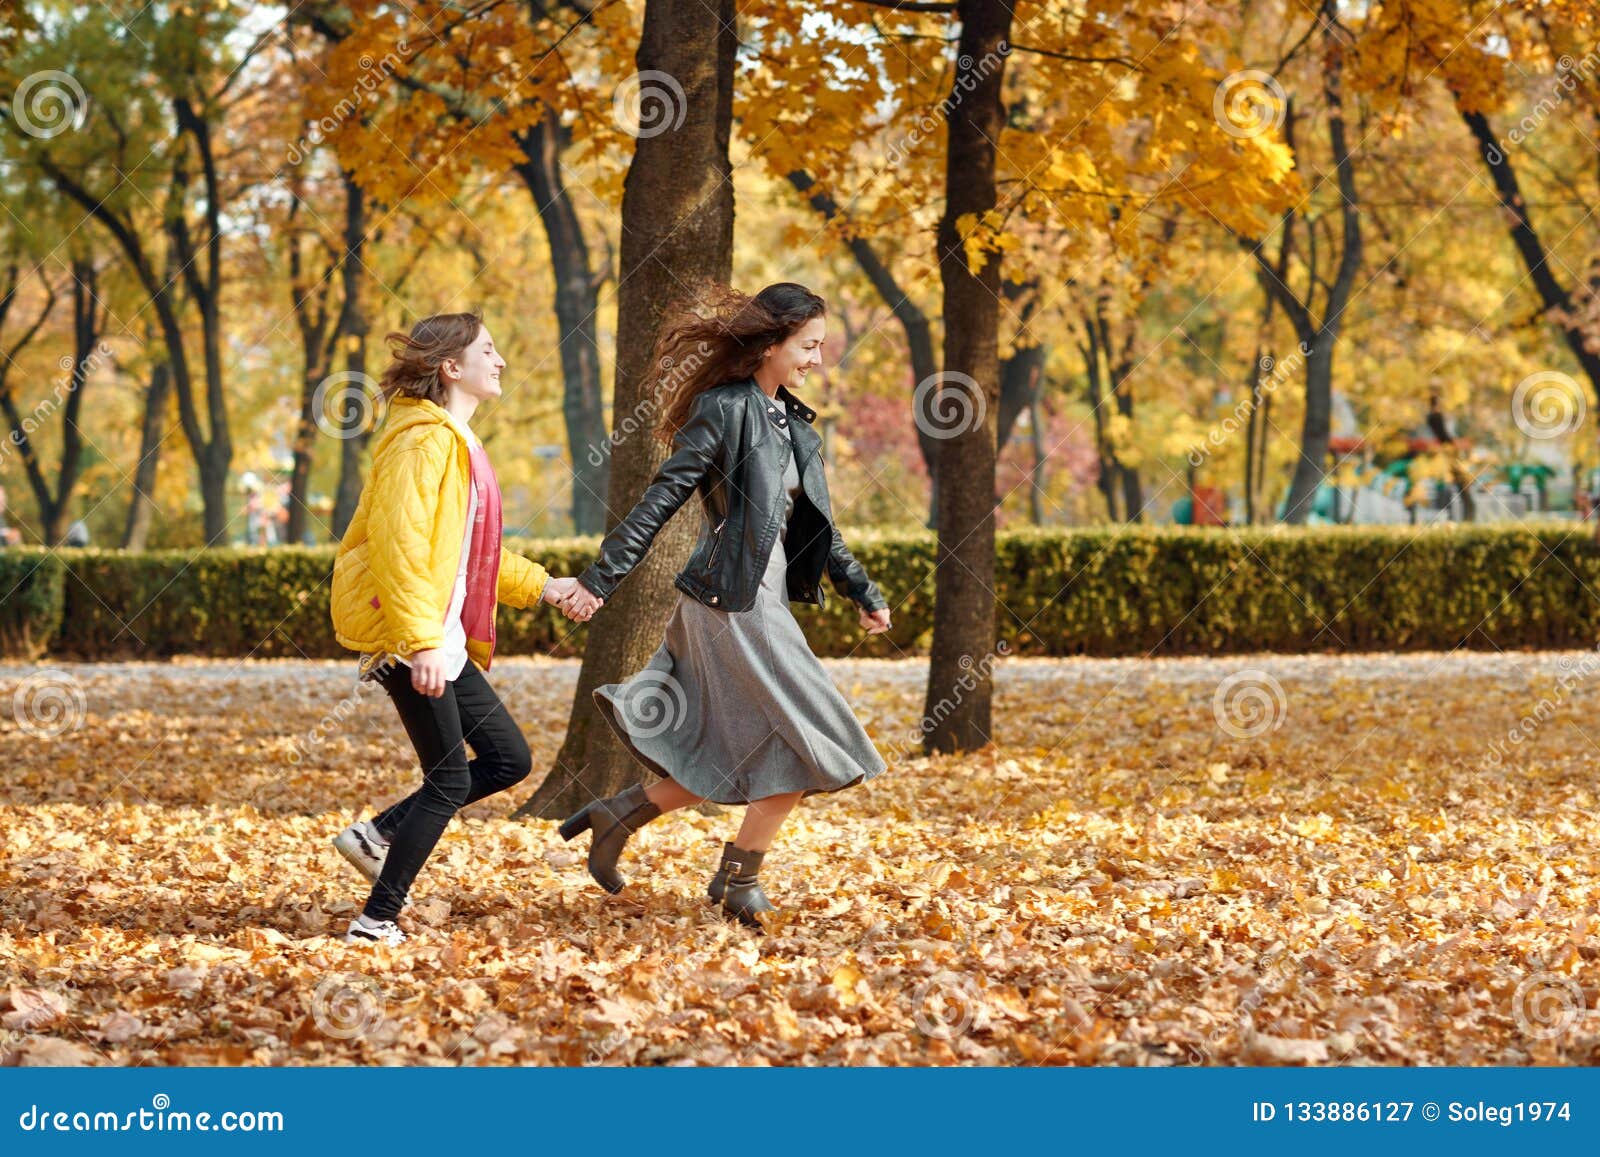 Two Happy Girls Running in Autumn City Park Stock Image - Image of ...